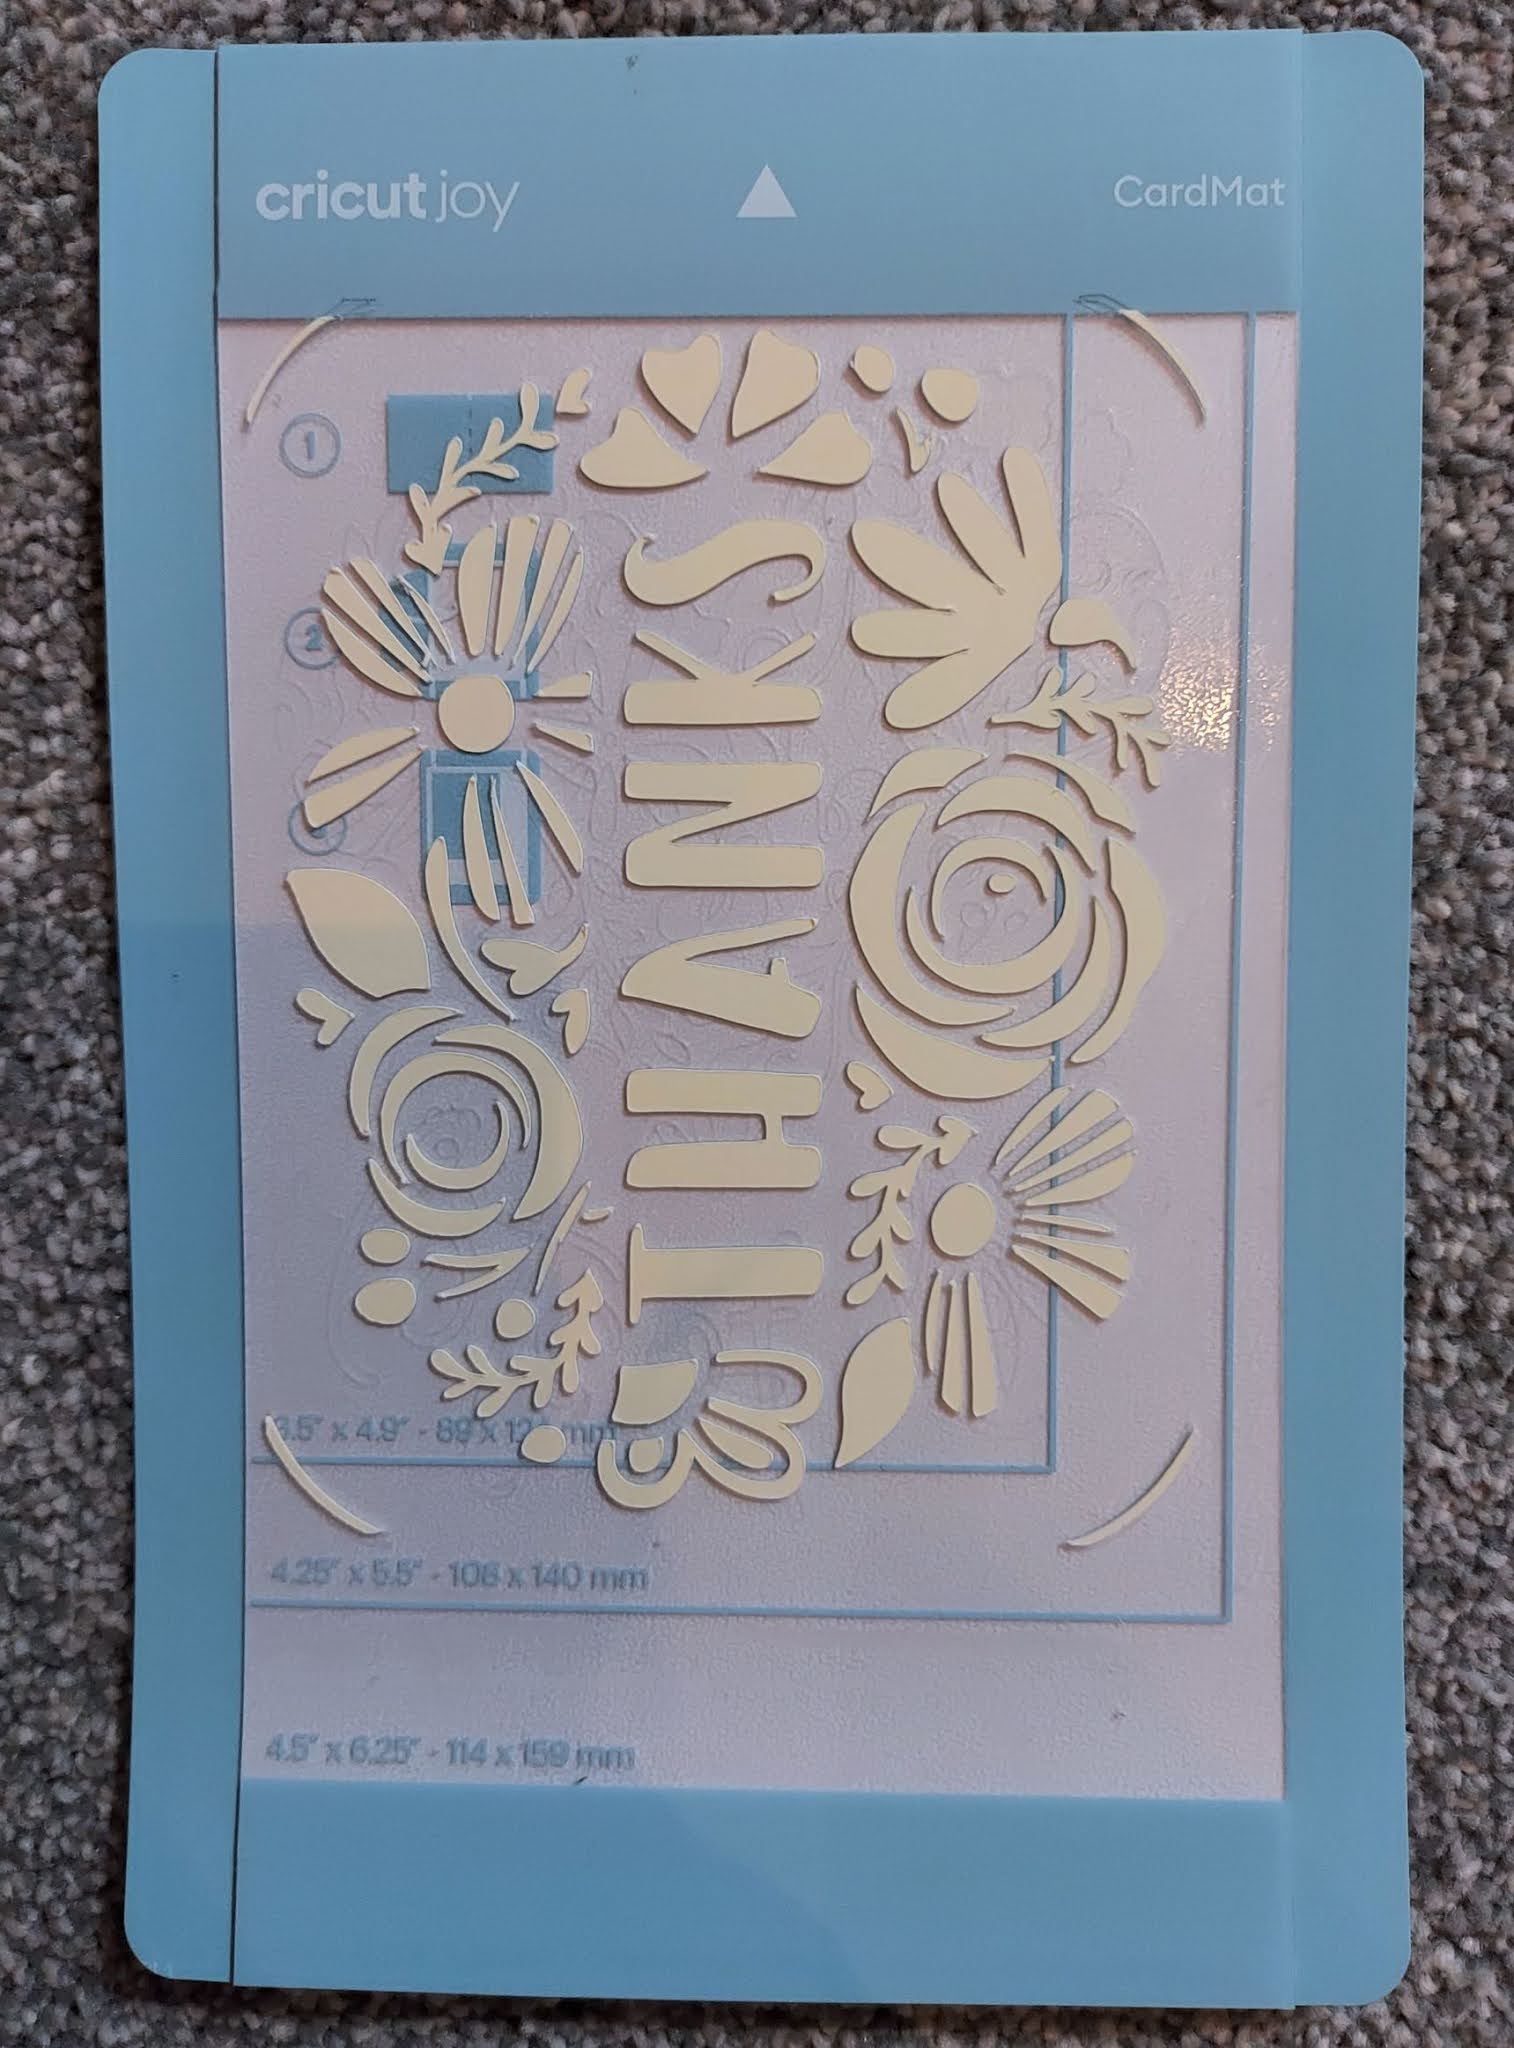 A Playful Stitch: What to do if your Cricut Joy Cards are Cutting too High